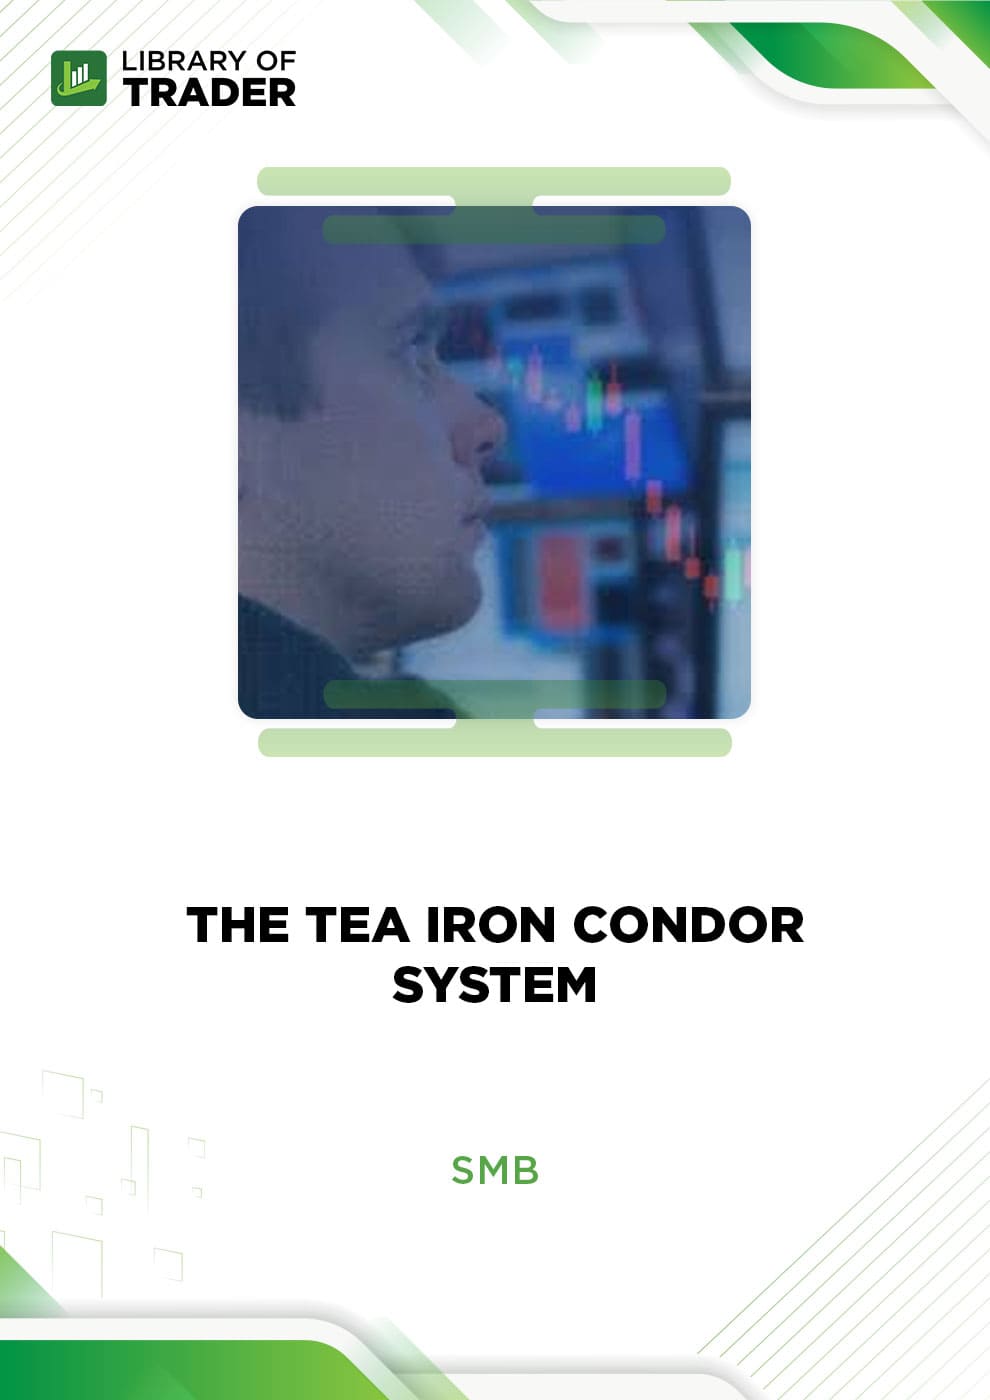 The Tea Iron Condor System from SMB